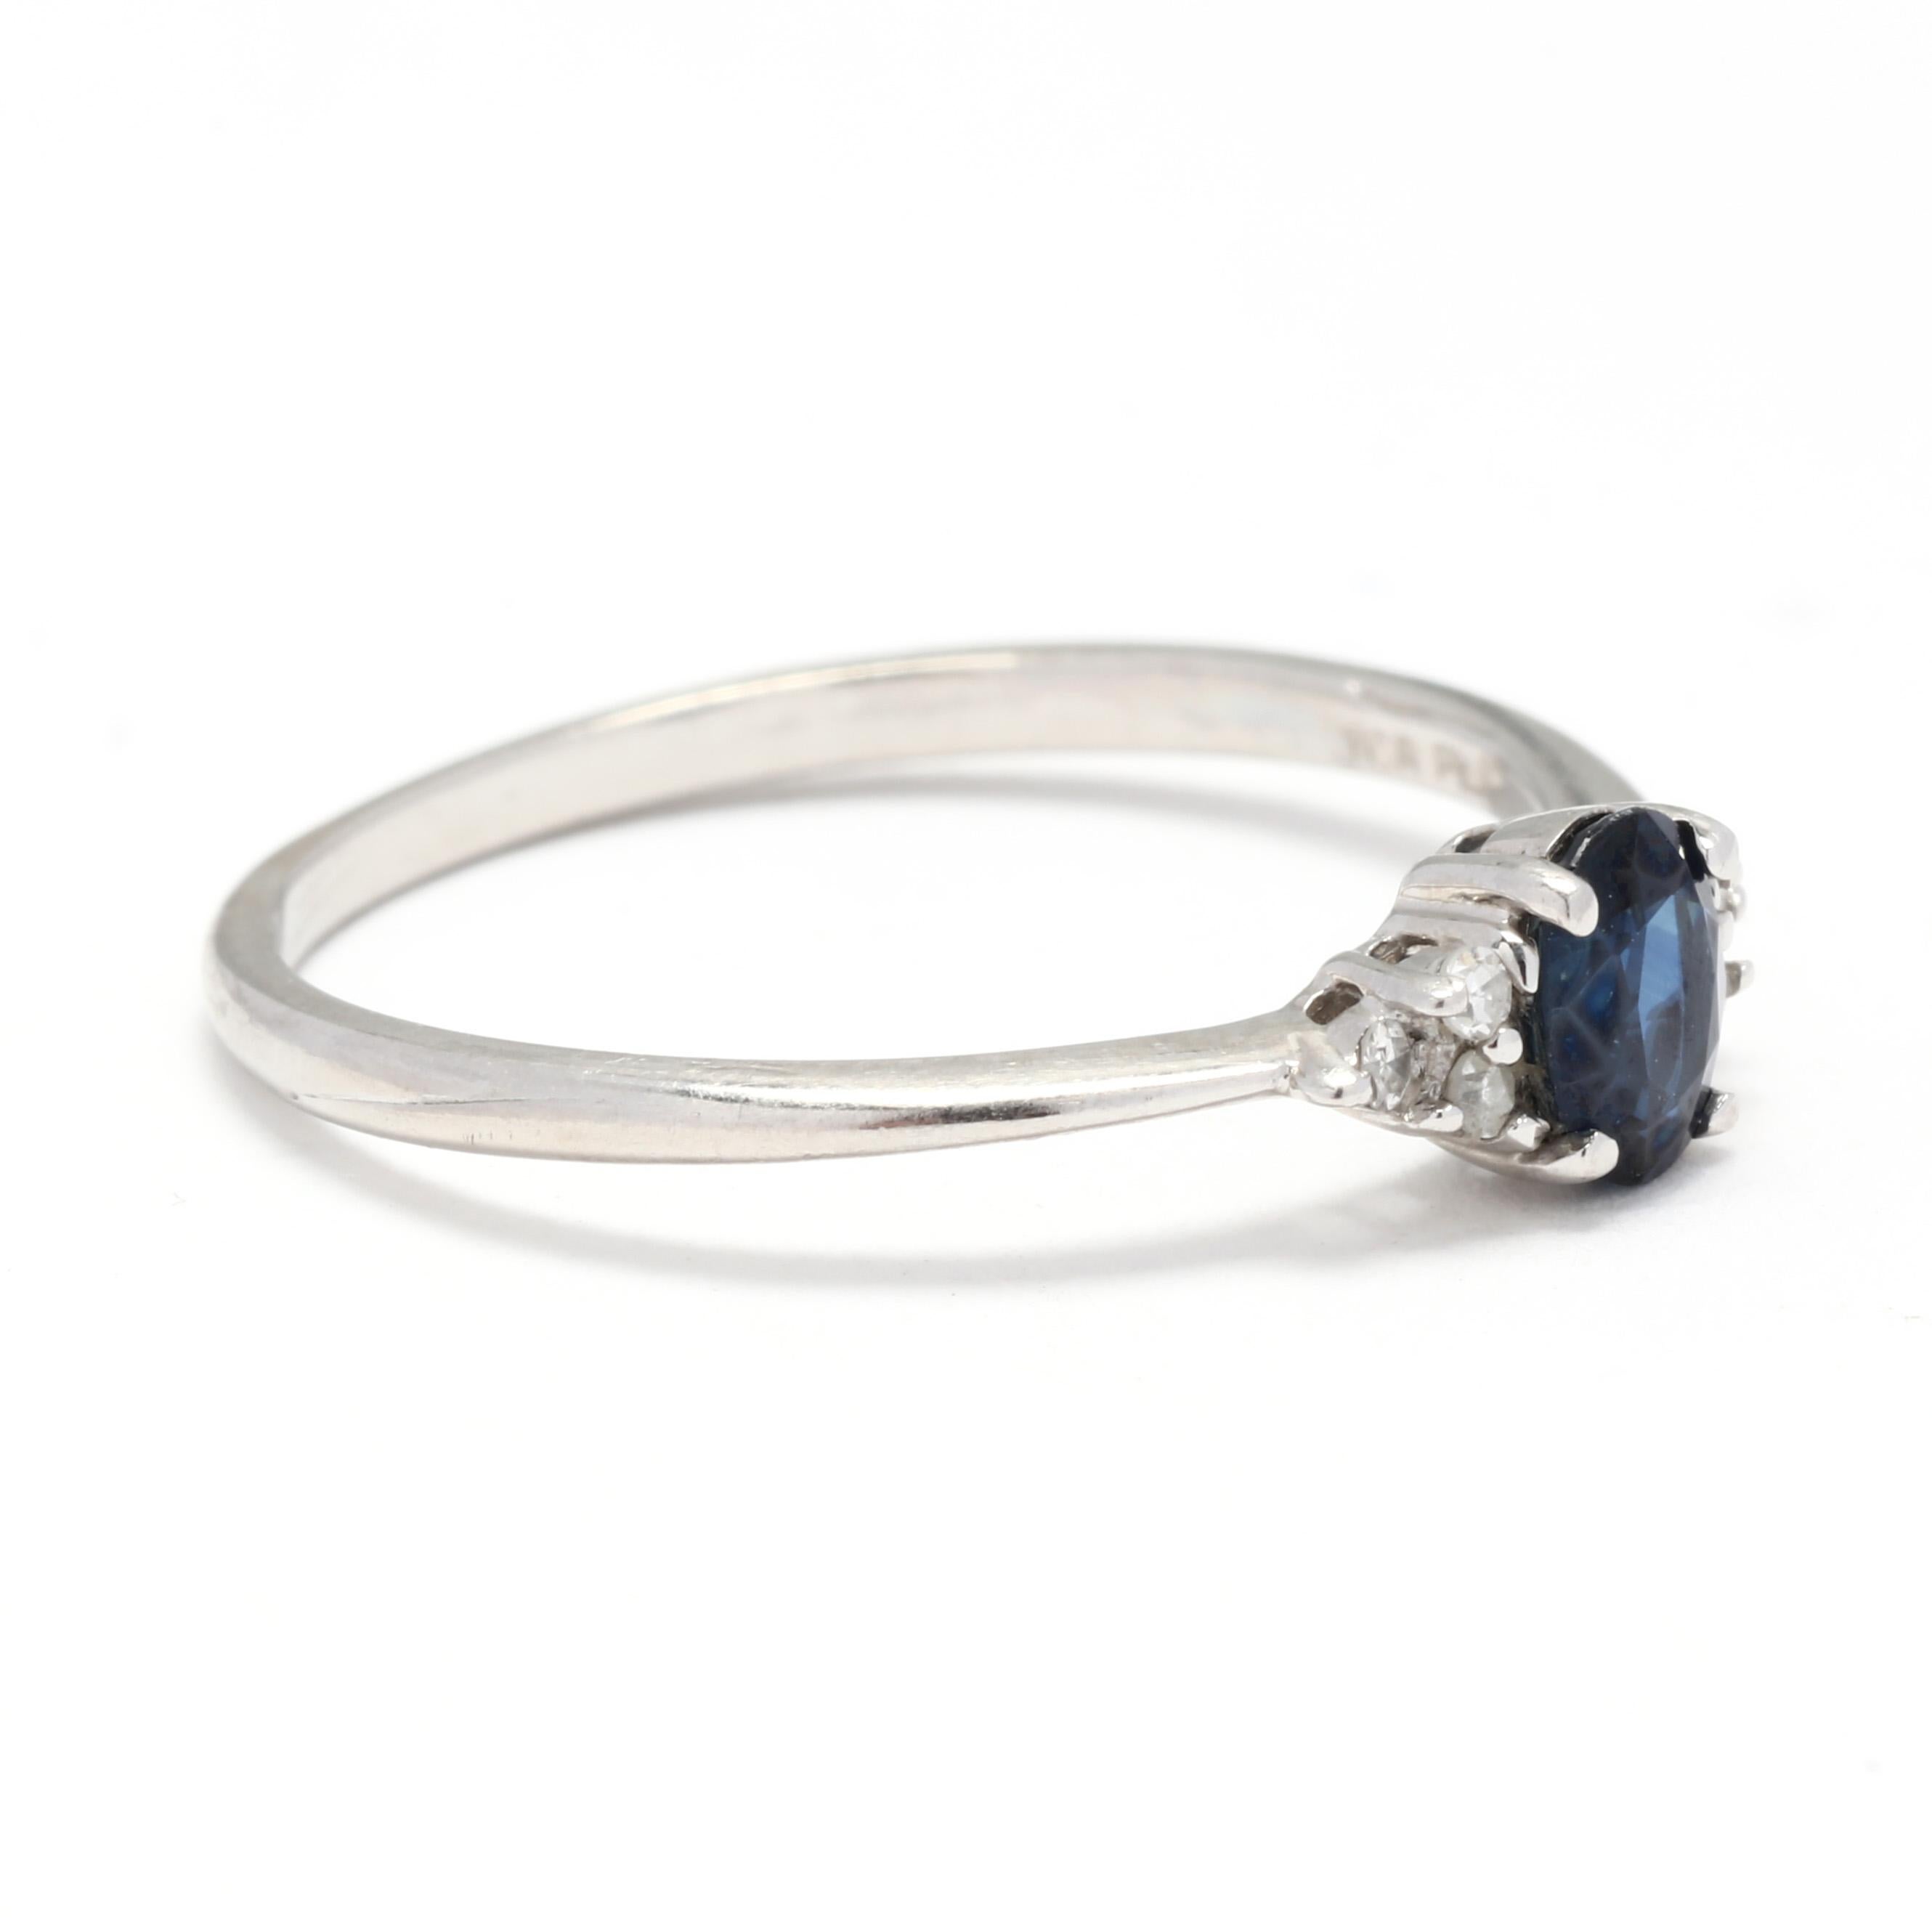 A platinum natural sapphire and diamond engagement ring. This small ring features a prong set, oval cut sapphire weighing approximately .50 carat with three single cut round diamonds weighing .05 total carats on either side and with a tapered